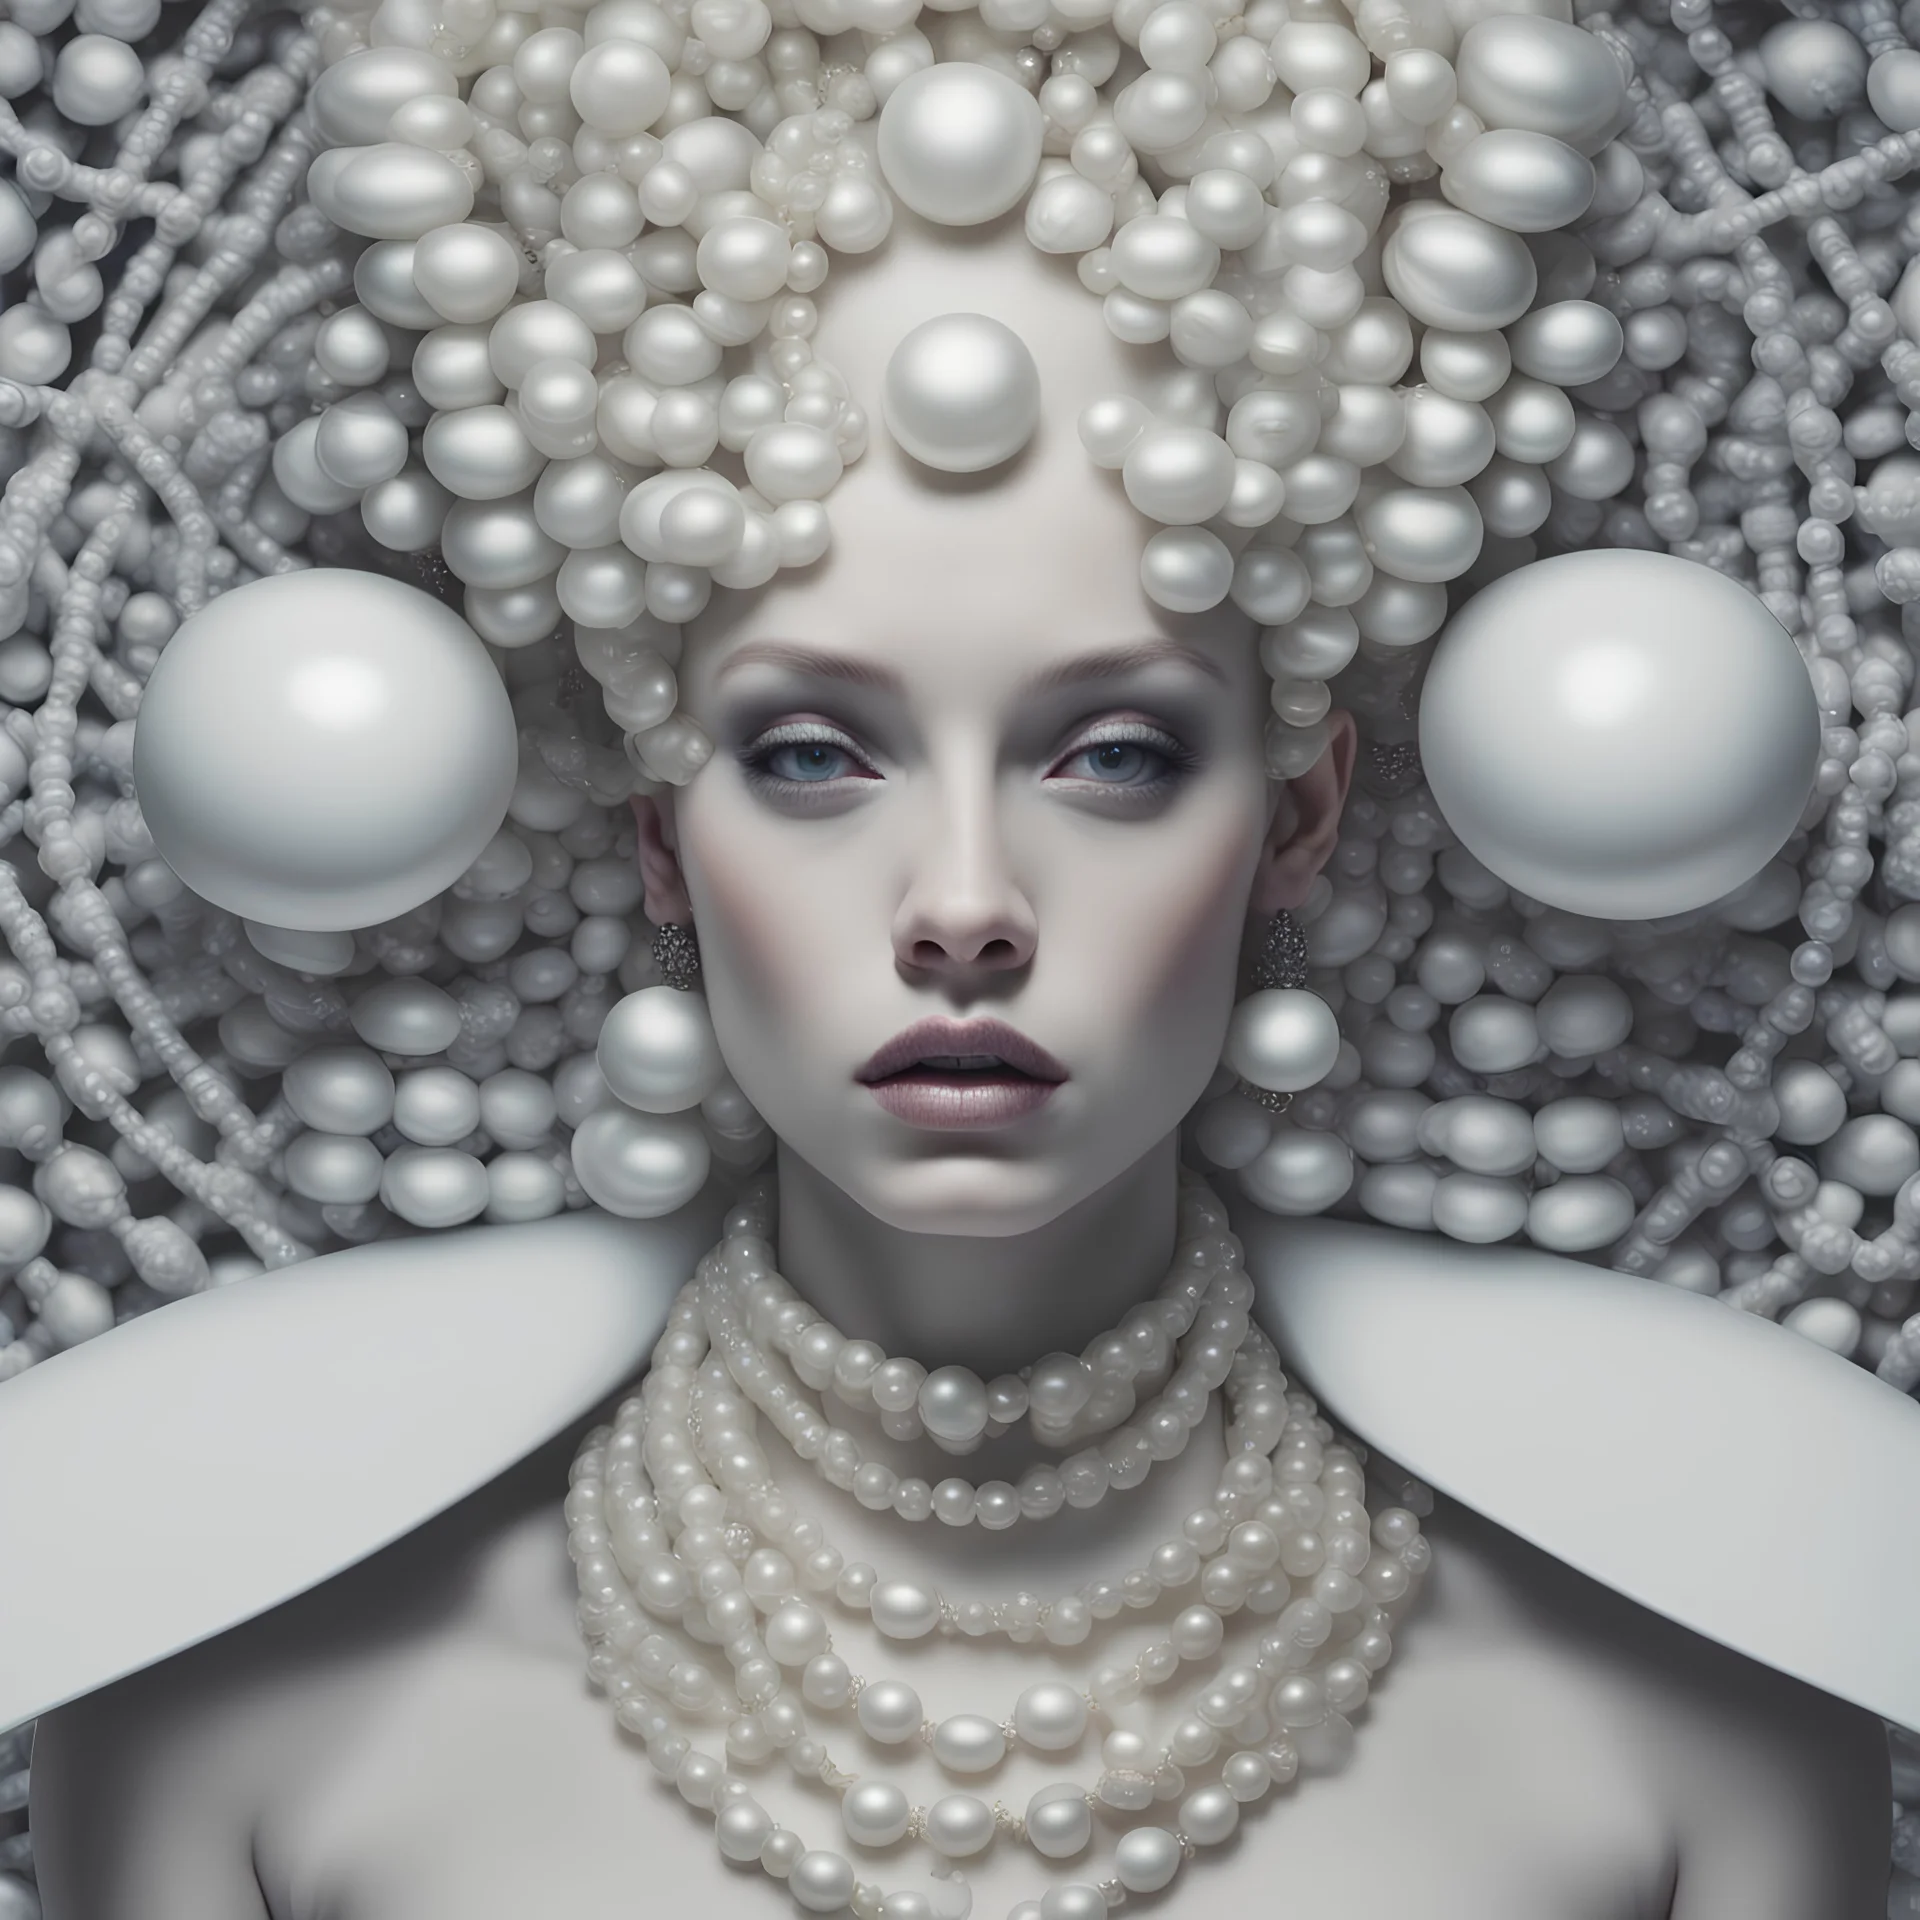 a close up of a woman with pearls on her head, art station front page, futuristic fashion clothing, personification of greed, hi - fructose art magazine, beautiful highly symmetric faces, bright white porcelain, interconnected human lifeforms, stylized portrait h 1280, justina blakeney, shot with Sony Alpha a9 Il and Sony FE 200-600mm f/5.6-6.3 G OSS lens, natural light, hyper realistic photograph, ultra detailed -ar 3:2 -q 2 -s 750